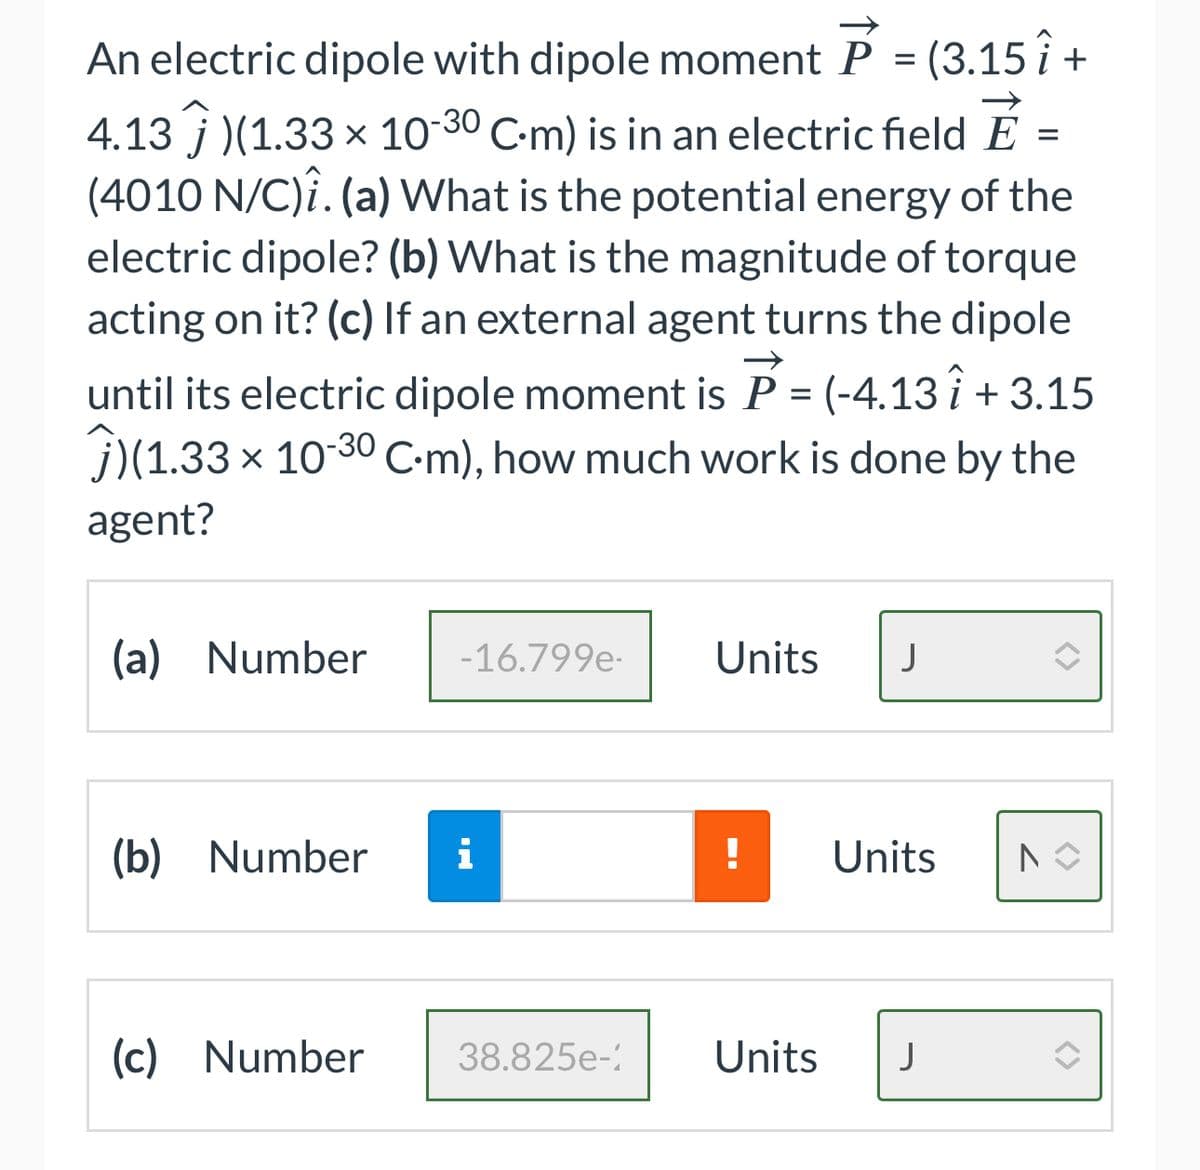 An electric dipole with dipole moment P = (3.15 î +
4.13)(1.33 × 10-30 C-m) is in an electric field É =
(4010 N/C)î. (a) What is the potential energy of the
electric dipole? (b) What is the magnitude of torque
acting on it? (c) If an external agent turns the dipole
until its electric dipole moment is P = (-4.13 î+ 3.15
(1.33 x 10-30 C.m), how much work is done by the
agent?
(a) Number
-16.799e-
(b) Number i
(c) Number
38.825e-
Units J
Units
Units J
7
<>